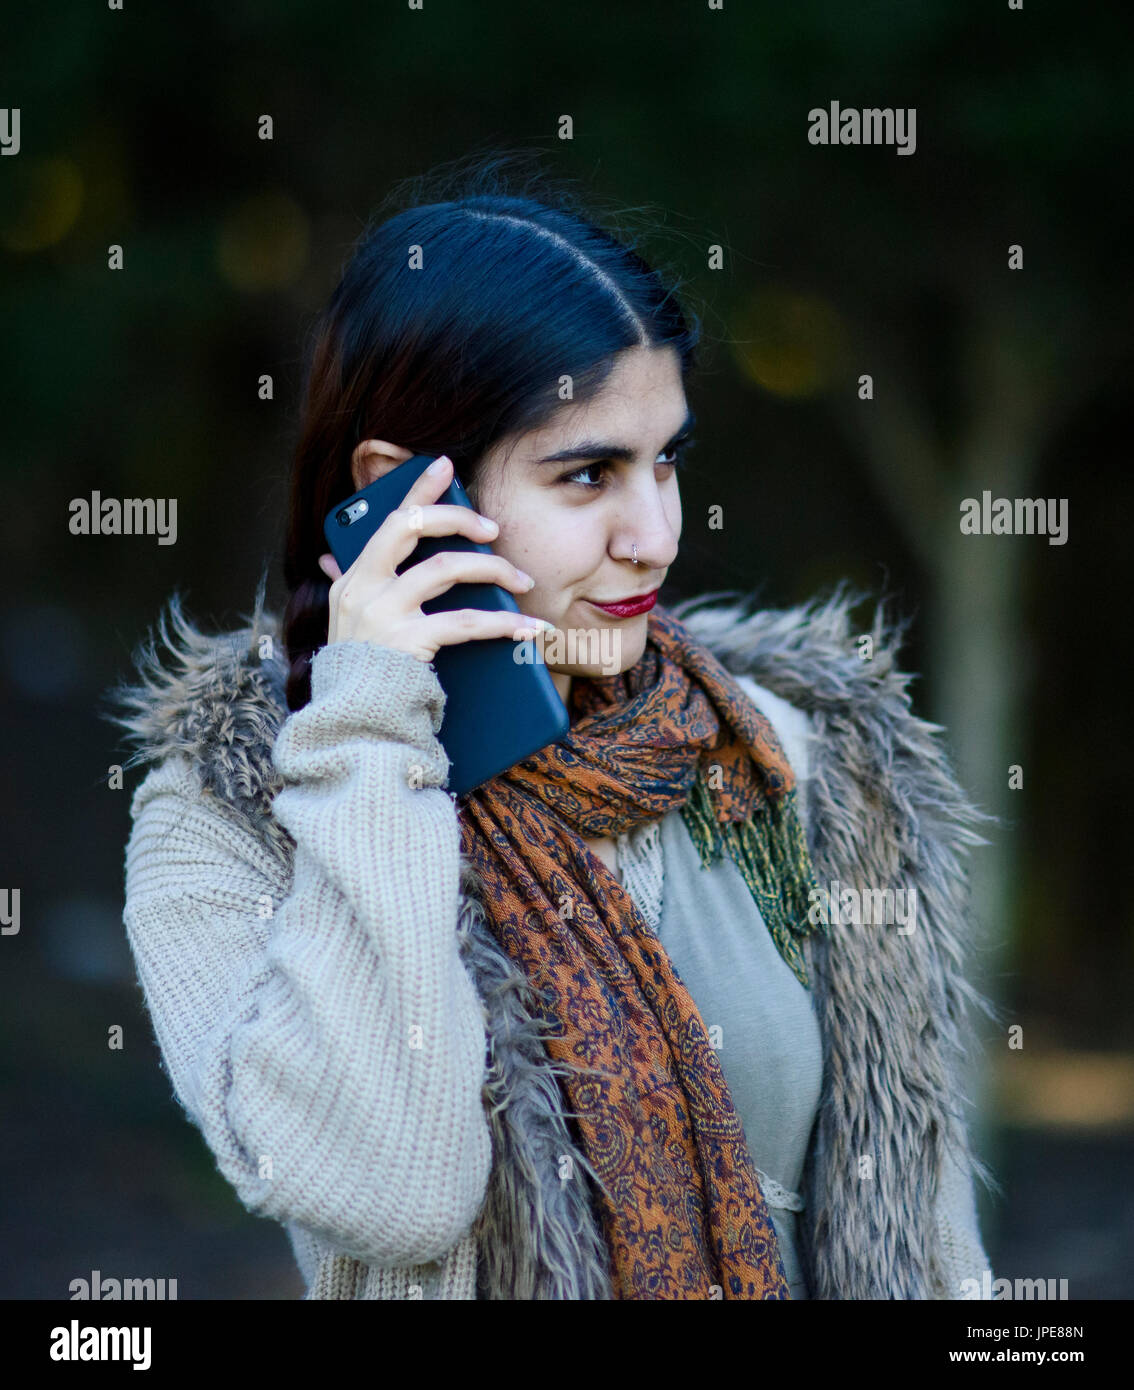 Persian girl talking on her mobile phone outdoors Stock Photo